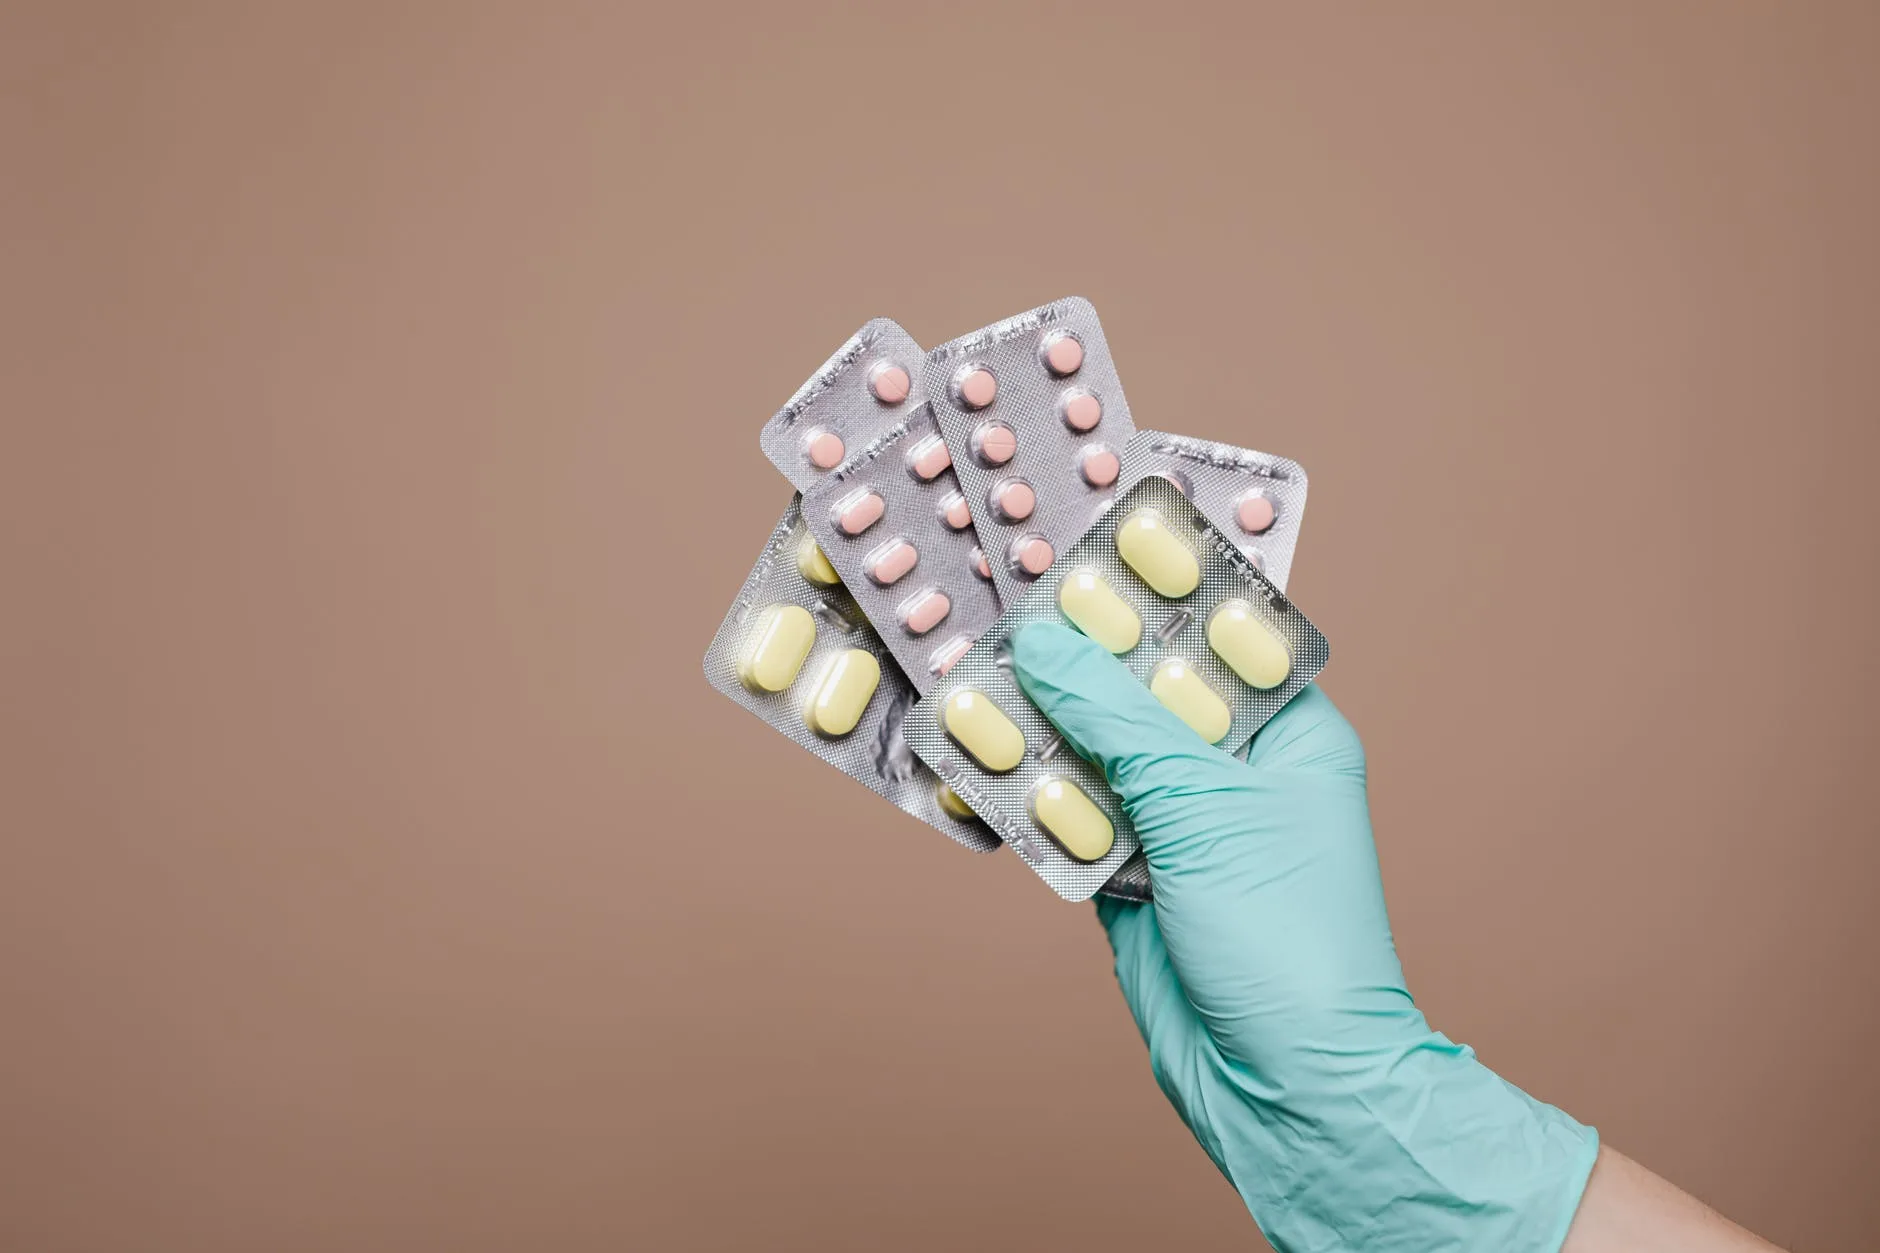 A person holding up different pills